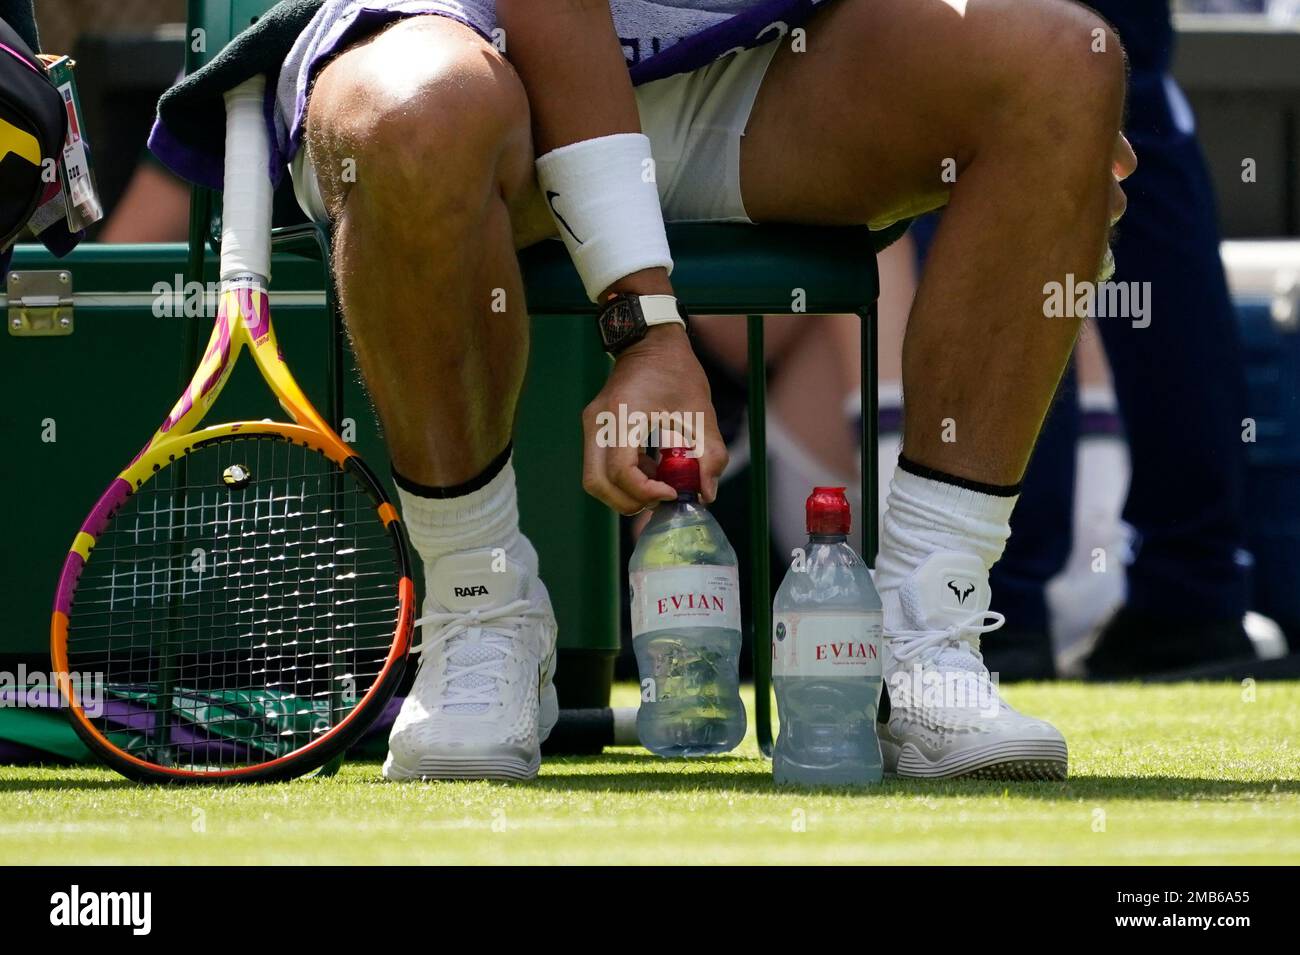 Spains Rafael Nadal arranges his water bottles during a break in his match against Argentinas Francisco Cerundolo in a first round mens singles match on day two of the Wimbledon tennis championships